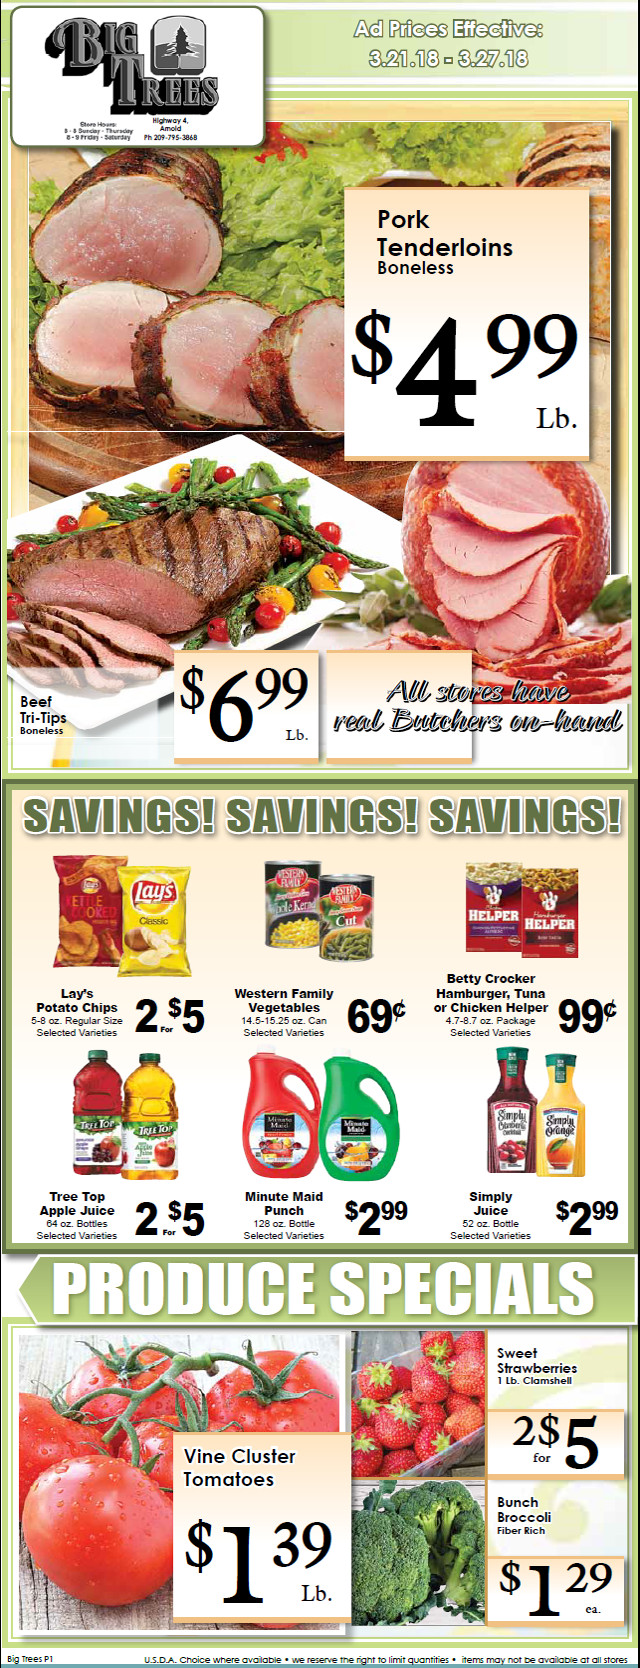 Big Trees Market Weekly Ad & Specials Through March 27th